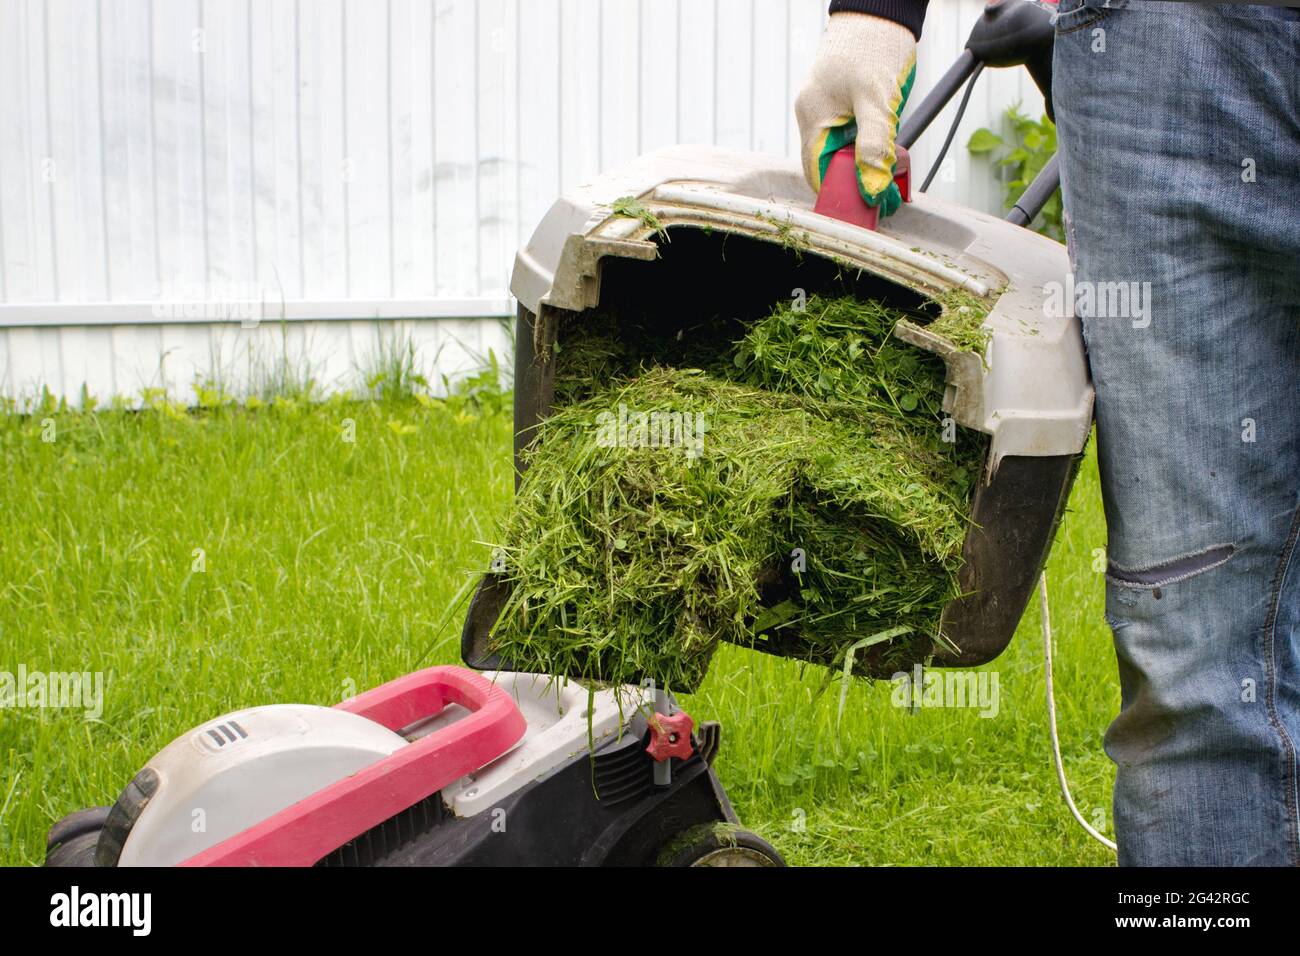 Man with lawn mower grass collector in hand. Man with lawnmower. Gardening and landscaping concept Stock Photo